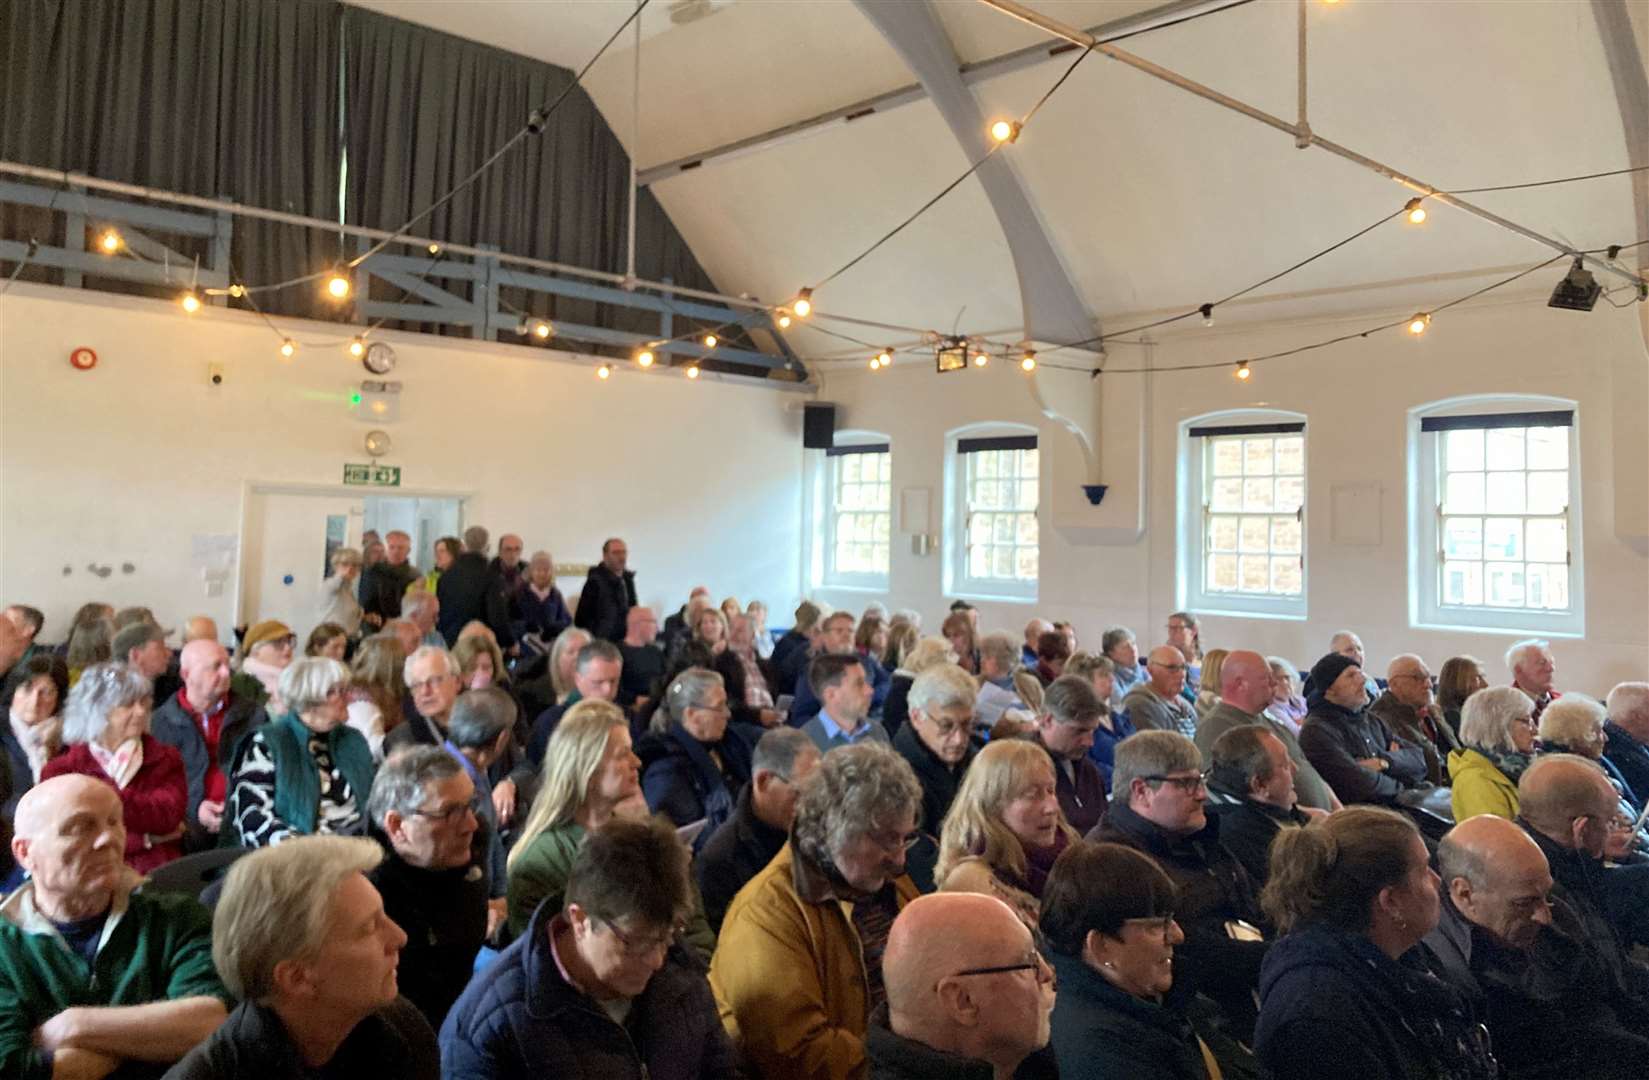 Whitstable's Umbrella Centre was packed for the meeting discussing Canterbury City Council’s plans for thousands of new homes